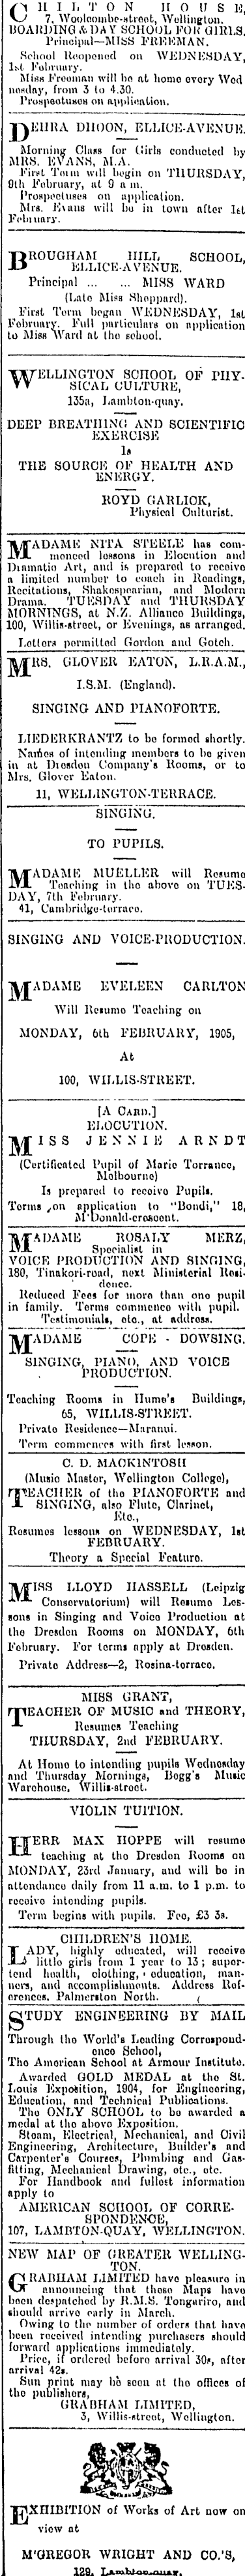 Papers Past Newspapers Evening Post 14 February 1905 Page 7 Advertisements Column 3